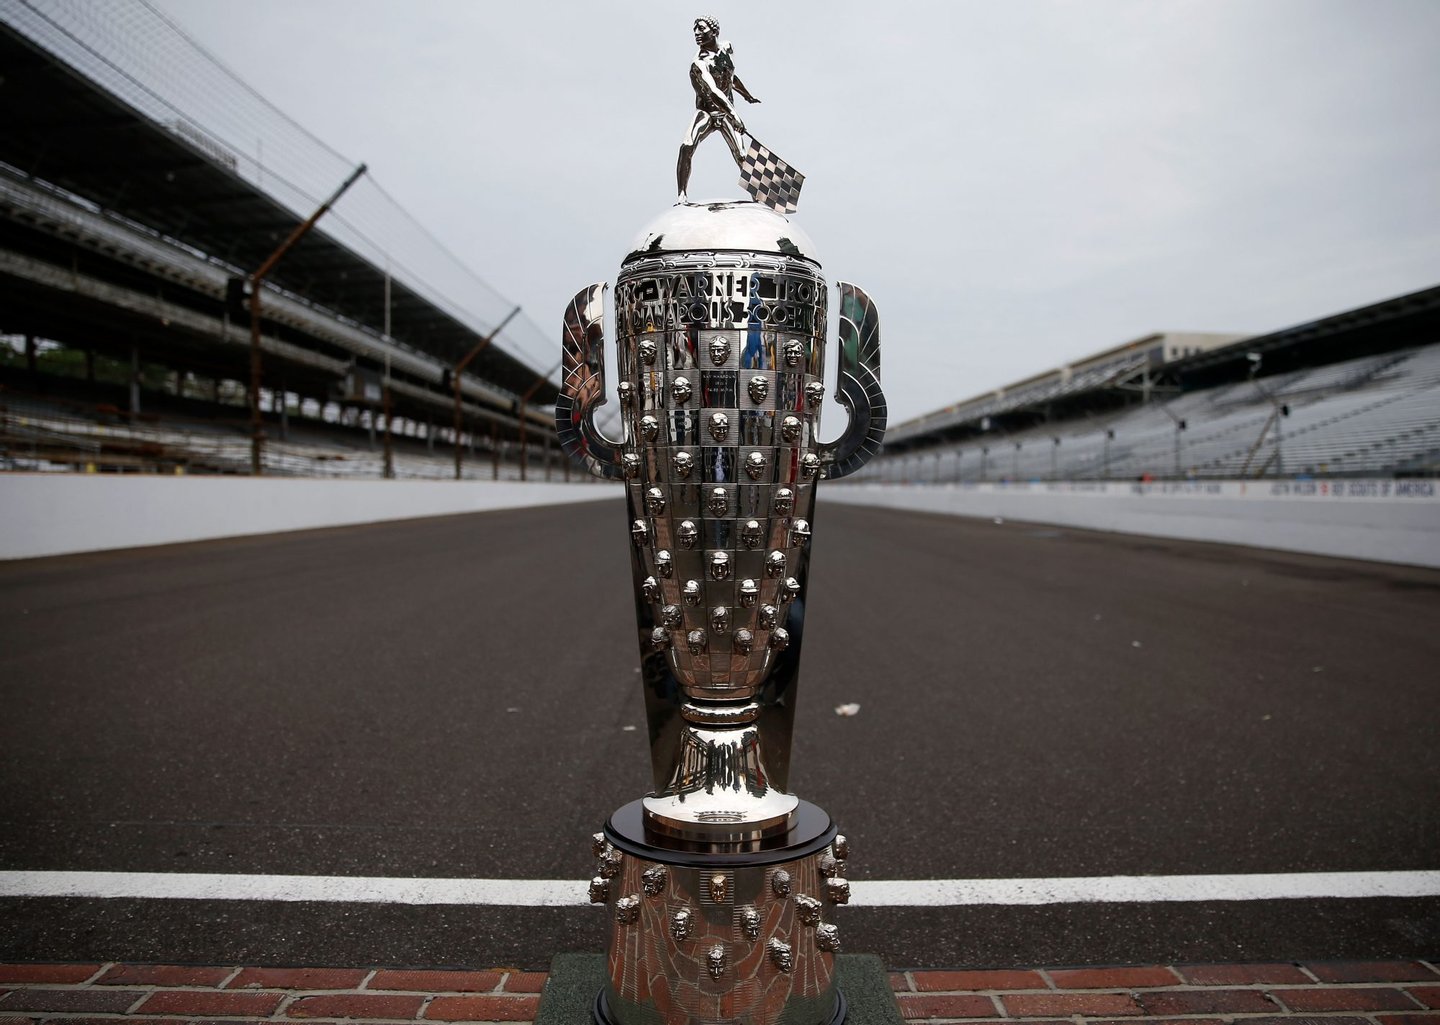 INDIANAPOLIS, IN - MAY 27: A detail of the Borg Warner Trophy on the yard of bricks during the Indianapolis 500 Mile Race Trophy Presentation and Champions Portrait Session for 2013 Indianapolis 500 Champion Tony Kanaan of Brazil, driver of the Hydroxycut KV Racing Technology-SH Racing Chevrolet, at Indianapolis Motor Speedway on May 27, 2013 in Indianapolis, Indiana. Kanaan earned his first Indy 500 victory by winning the 97th running of the race. (Photo by Chris Graythen/Getty Images)